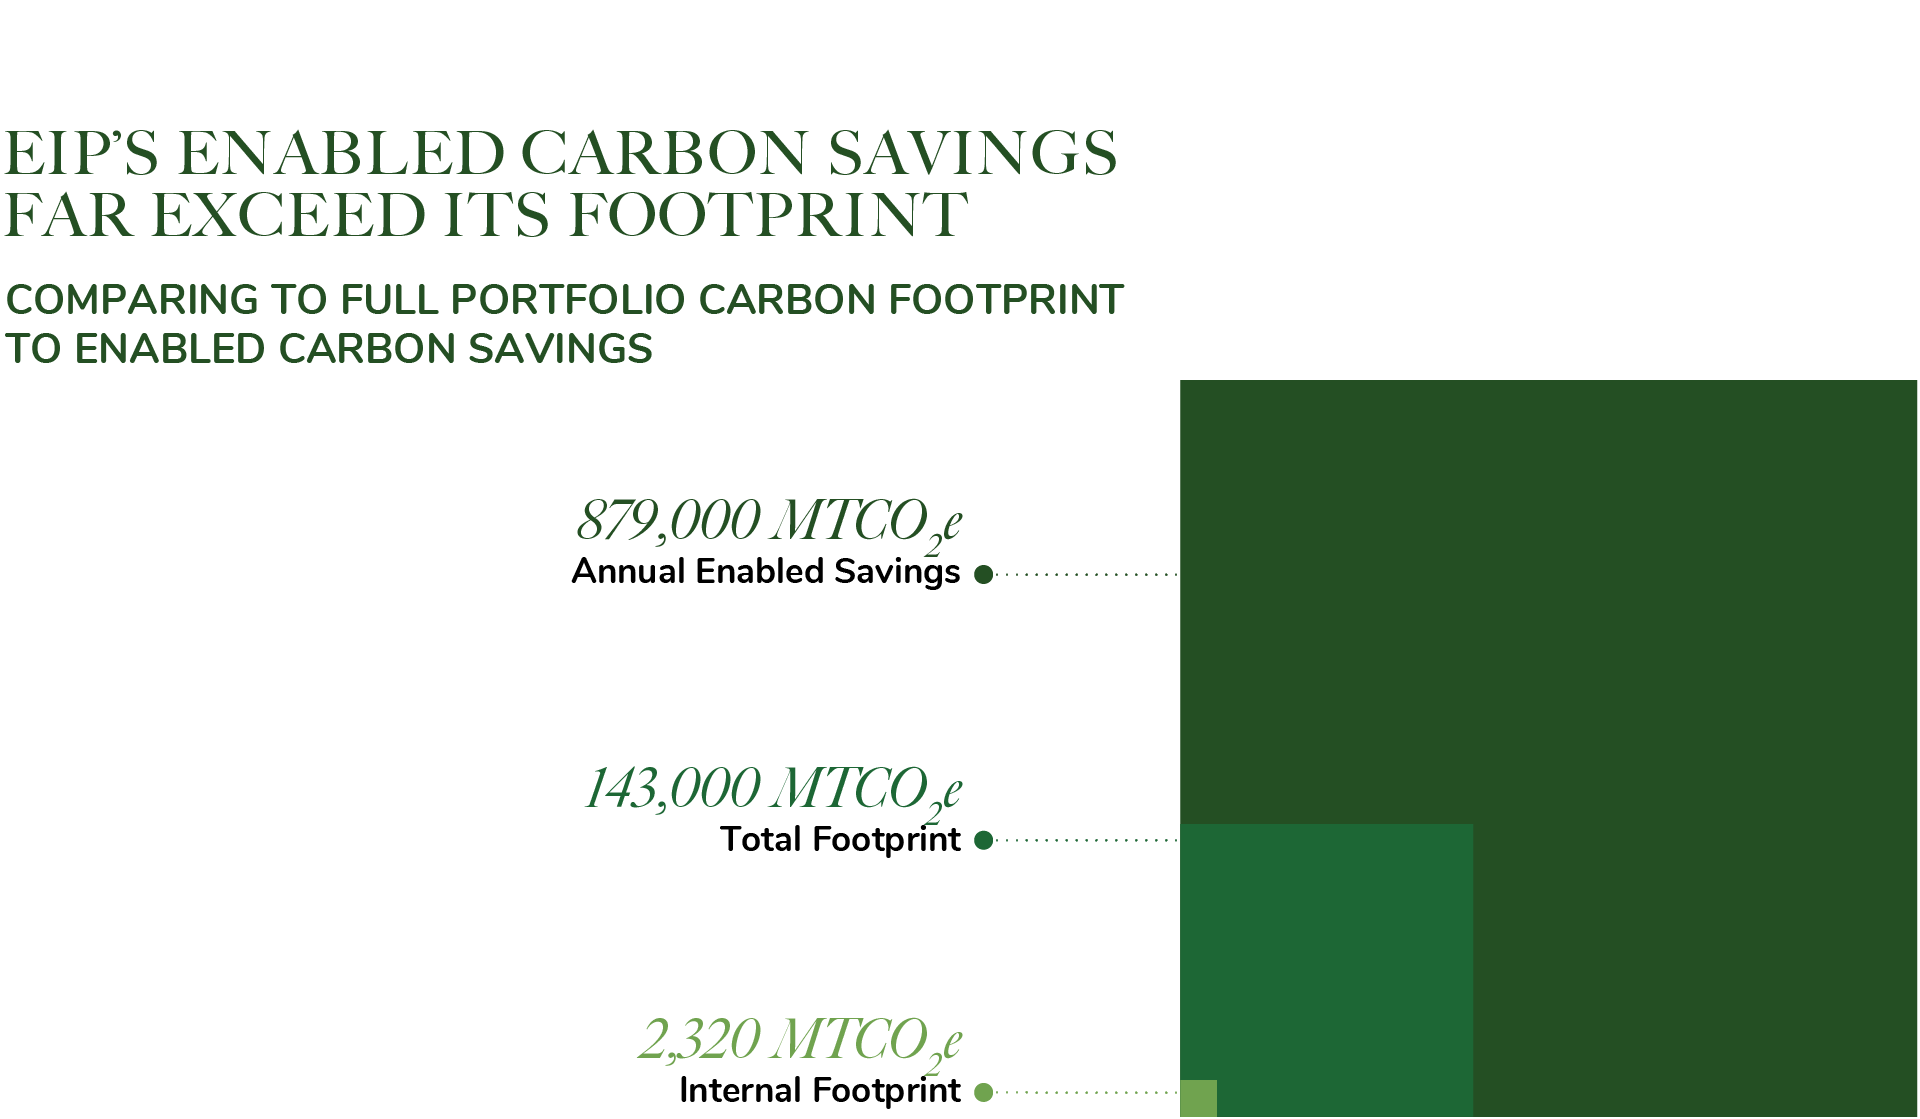 EIP's Enabled Carbon Savings Far Exceed its Footprint